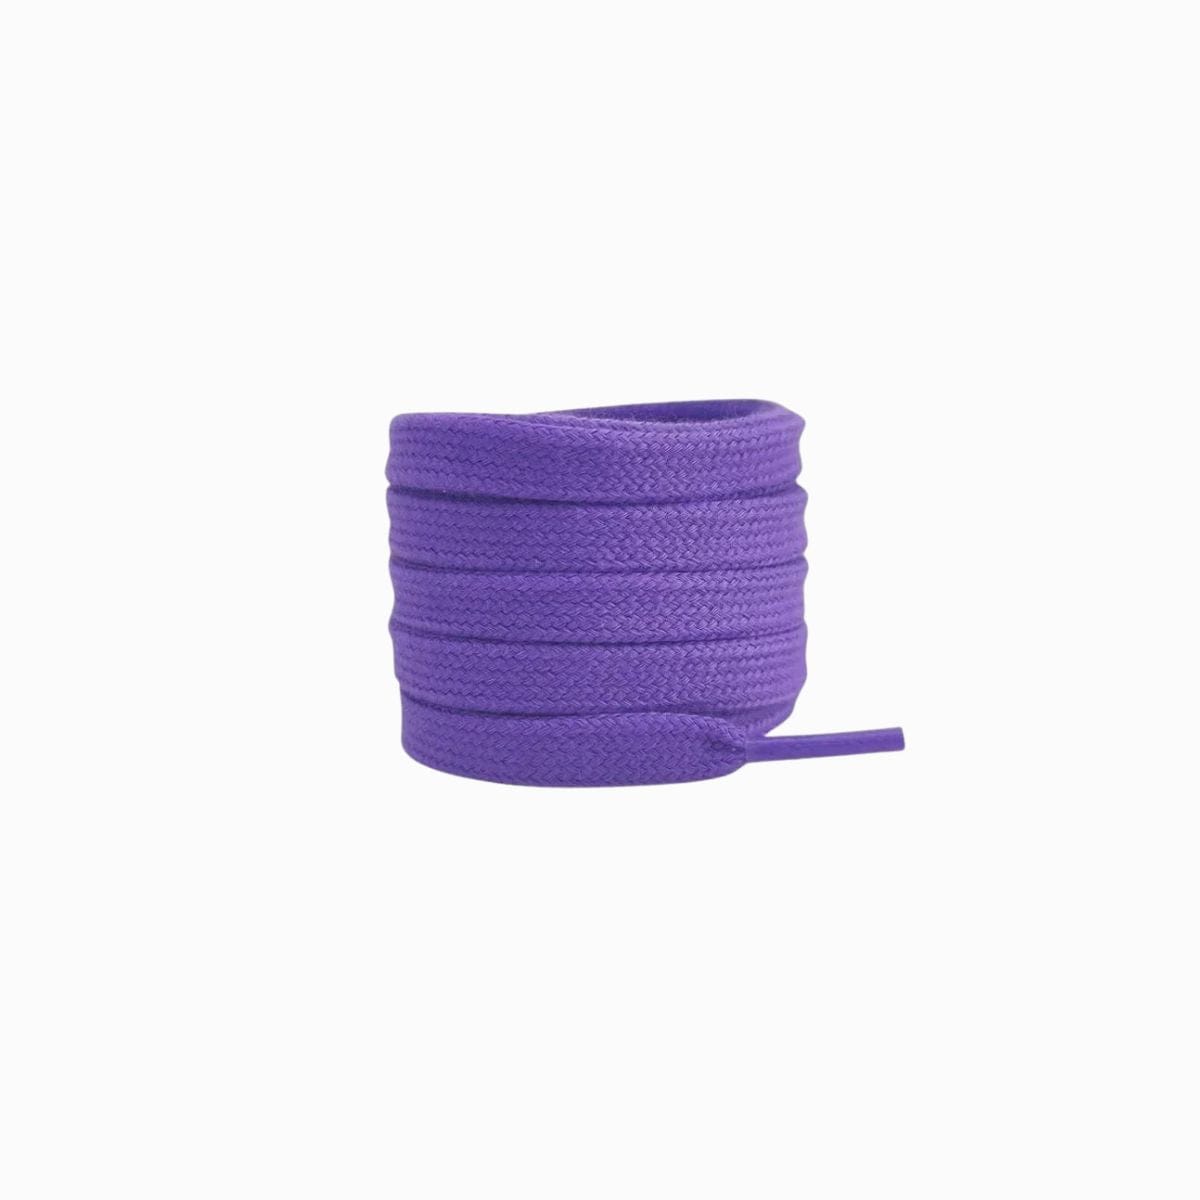 Purple Replacement Shoe Laces for Adidas Samba Sneakers by Kicks Shoelaces